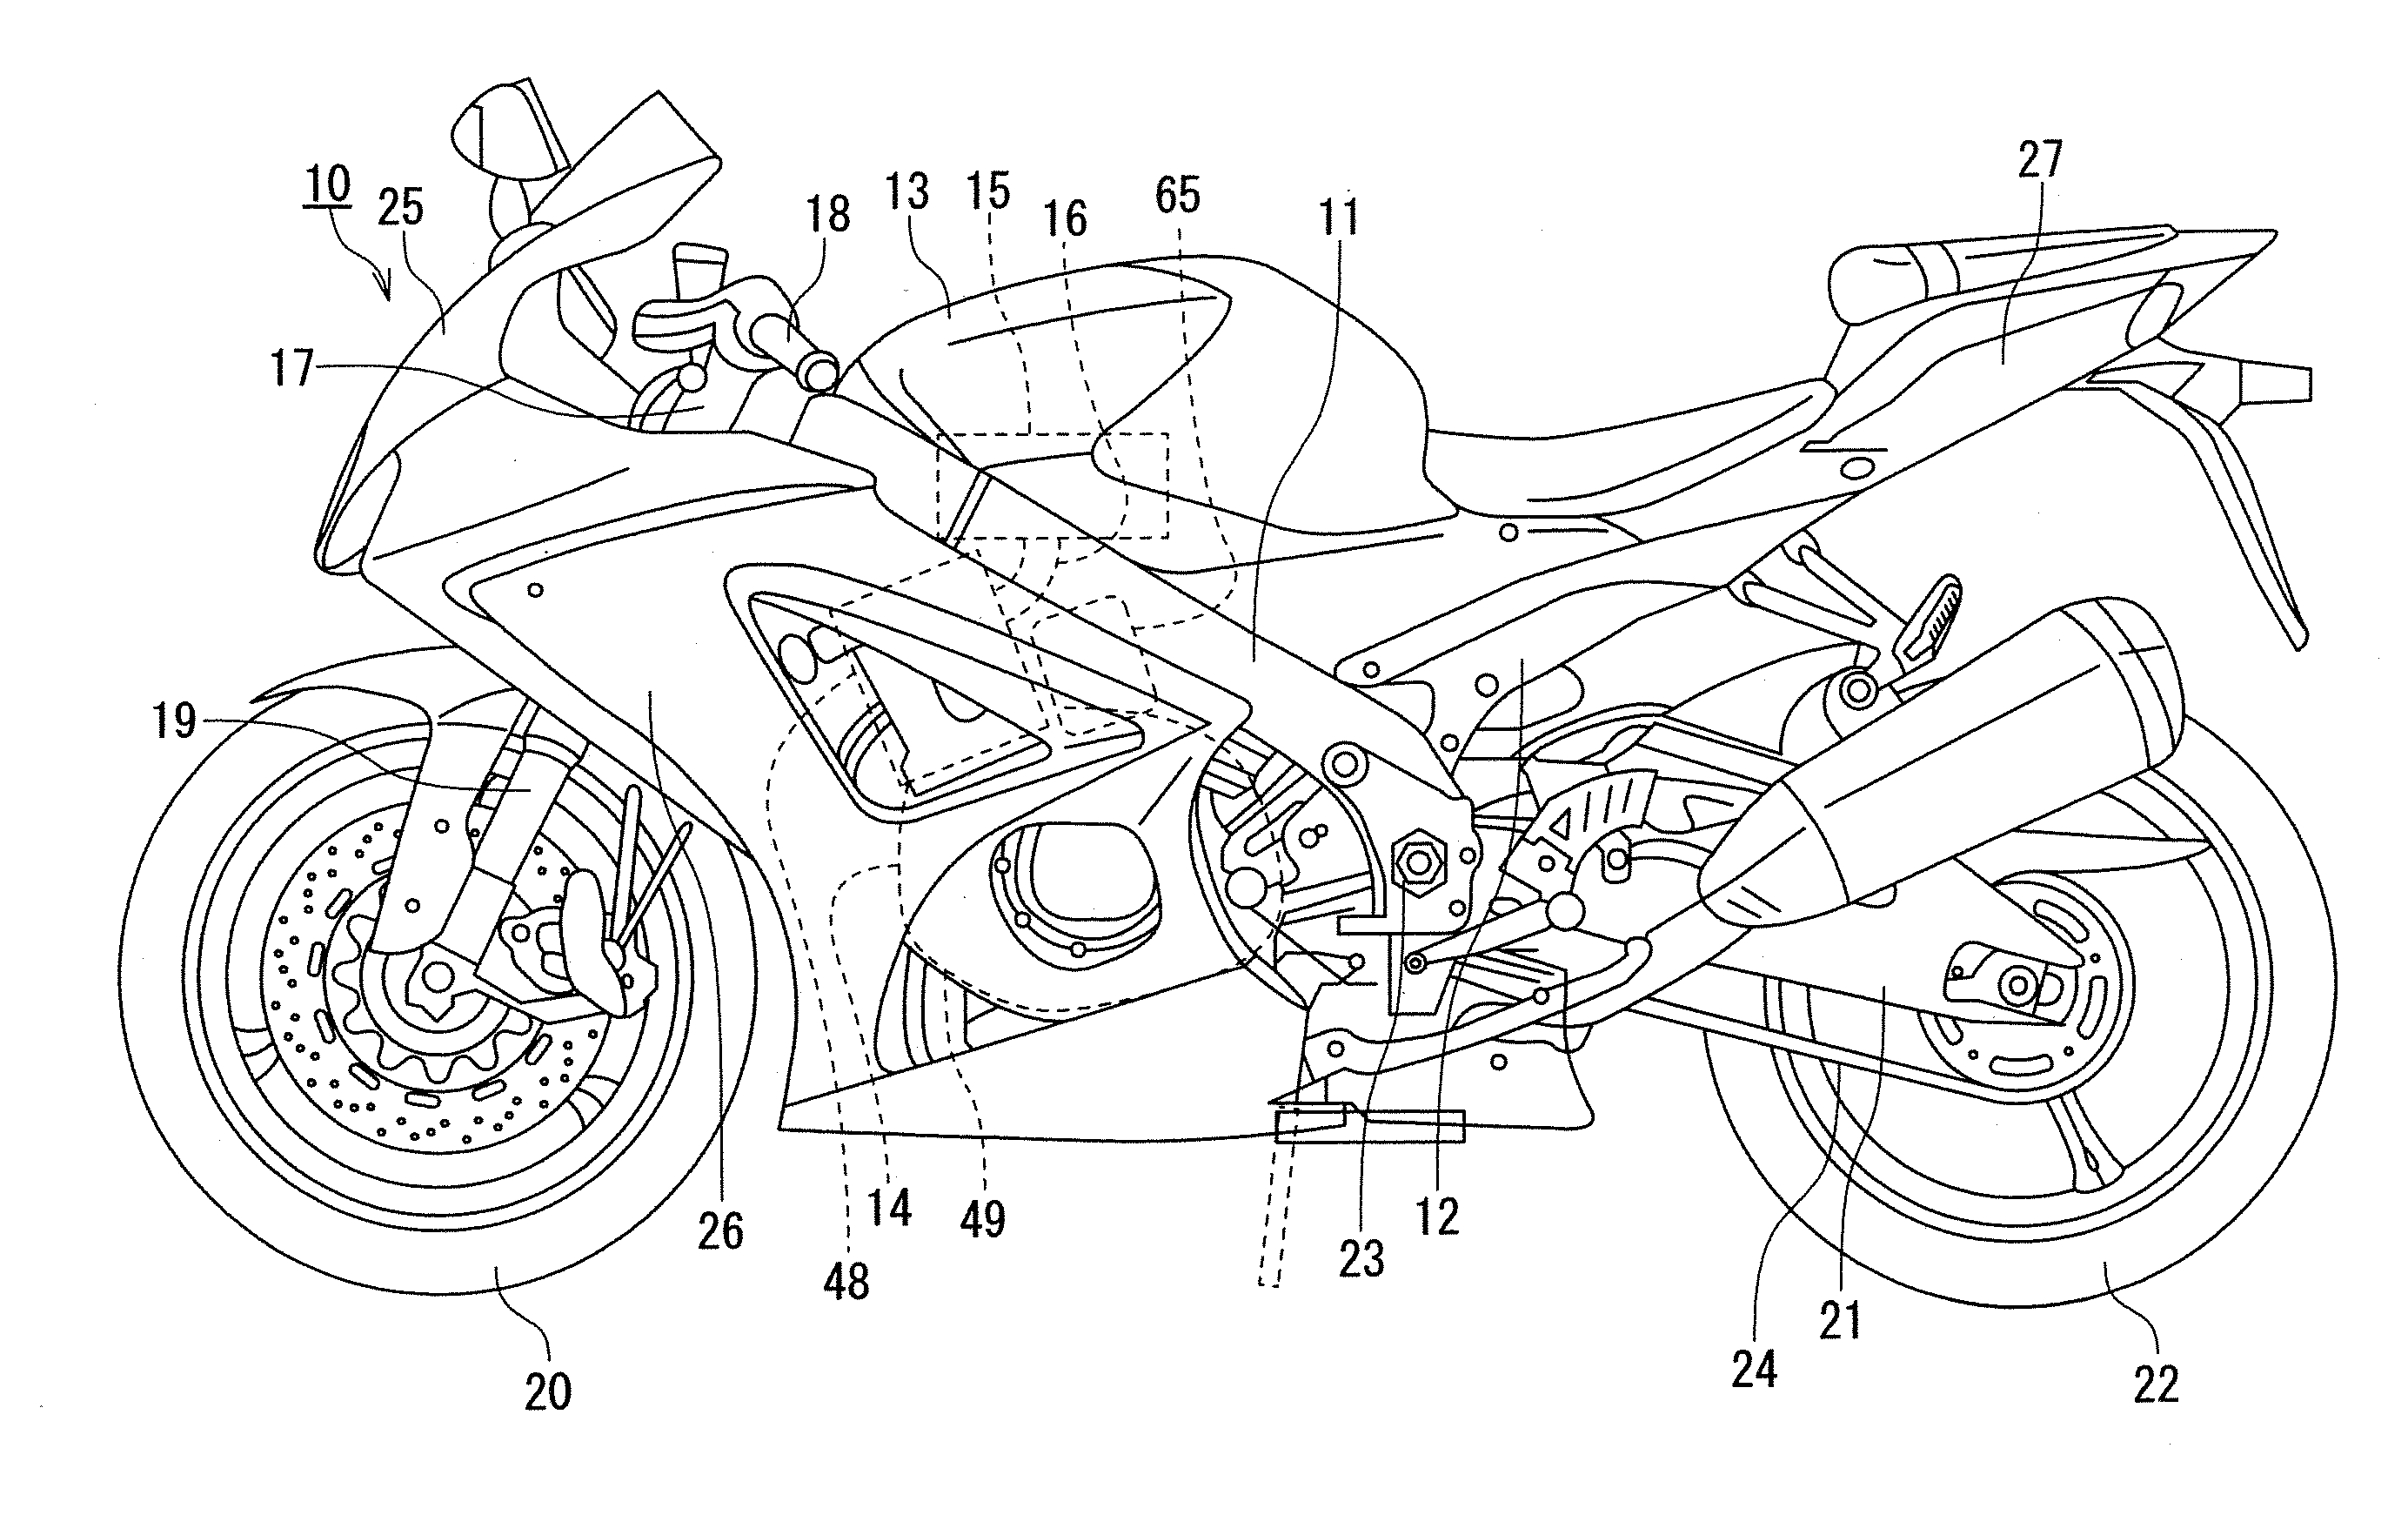 Canister device for motorcycle